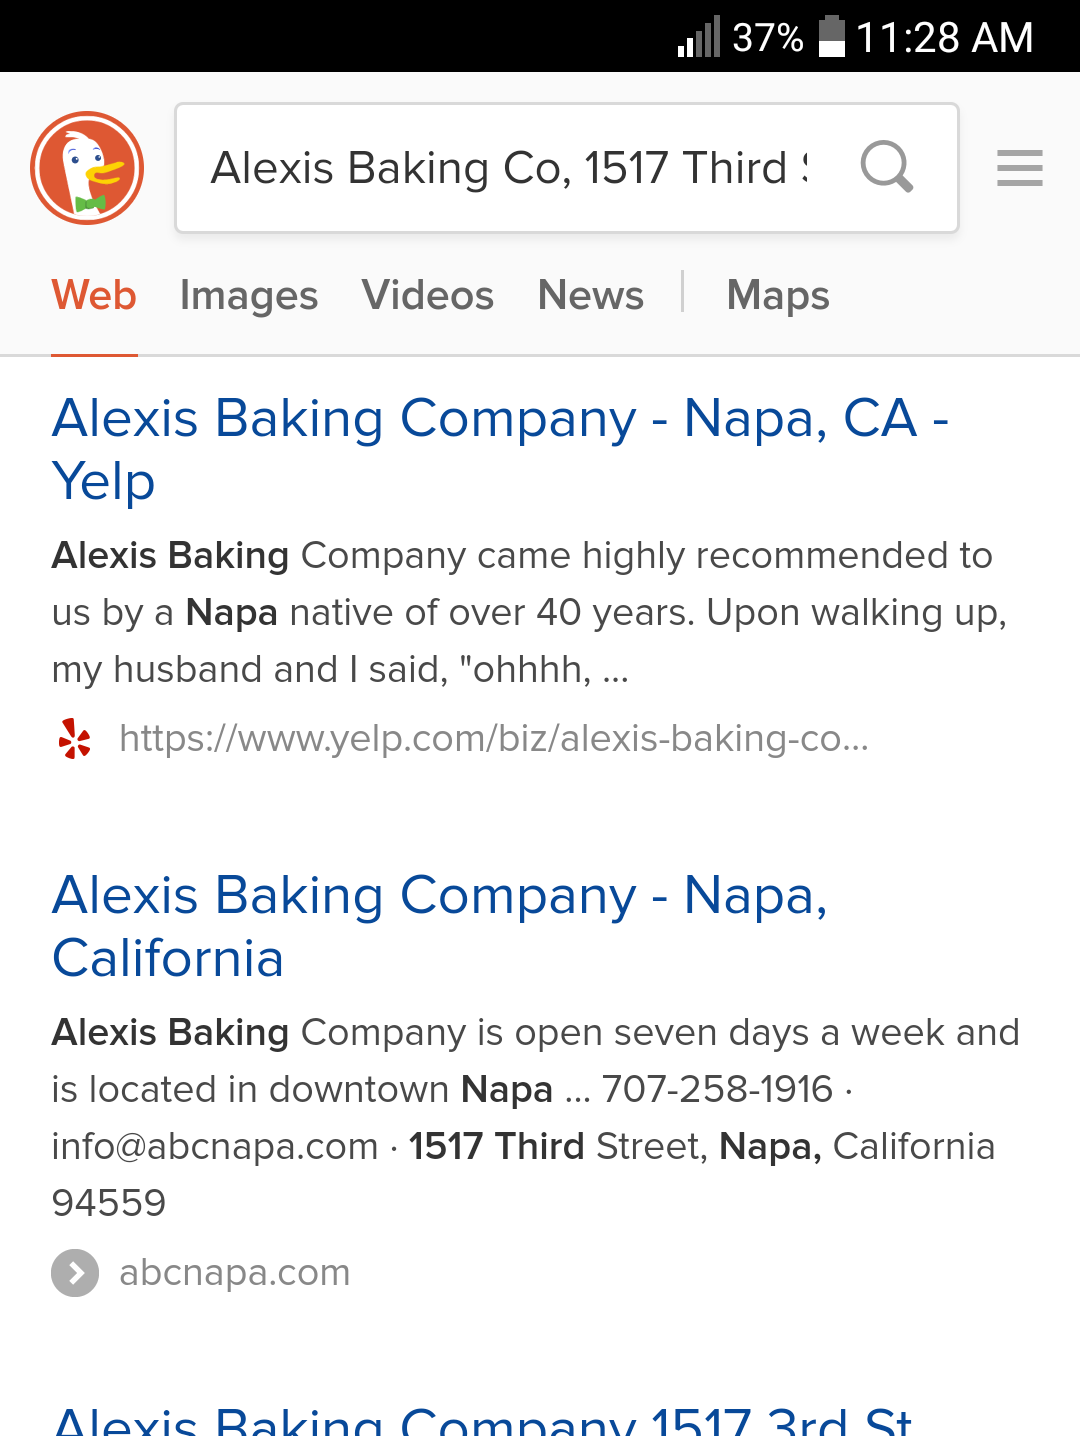 View of the app search query as seen on an Android device